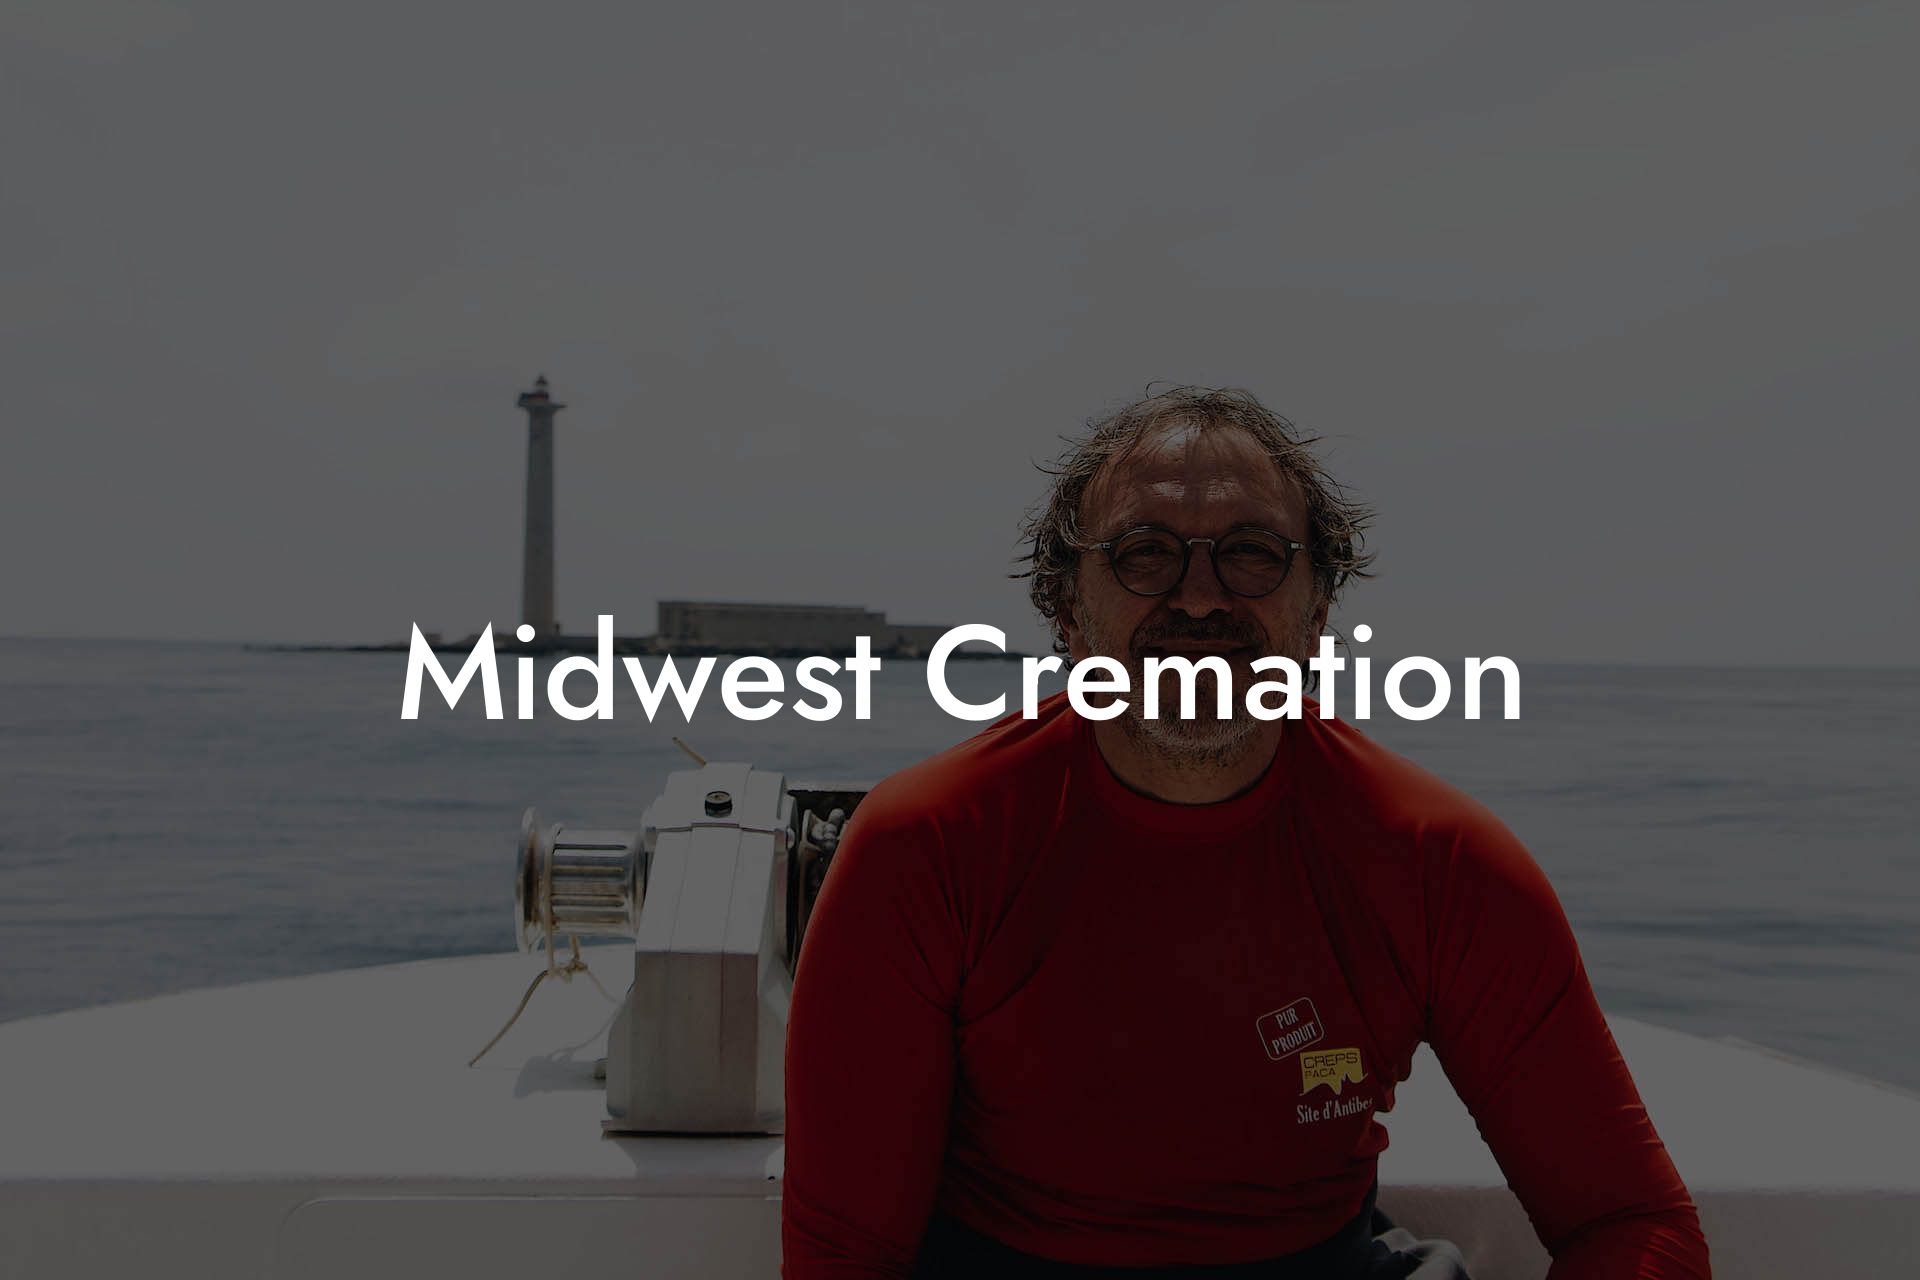 Midwest Cremation